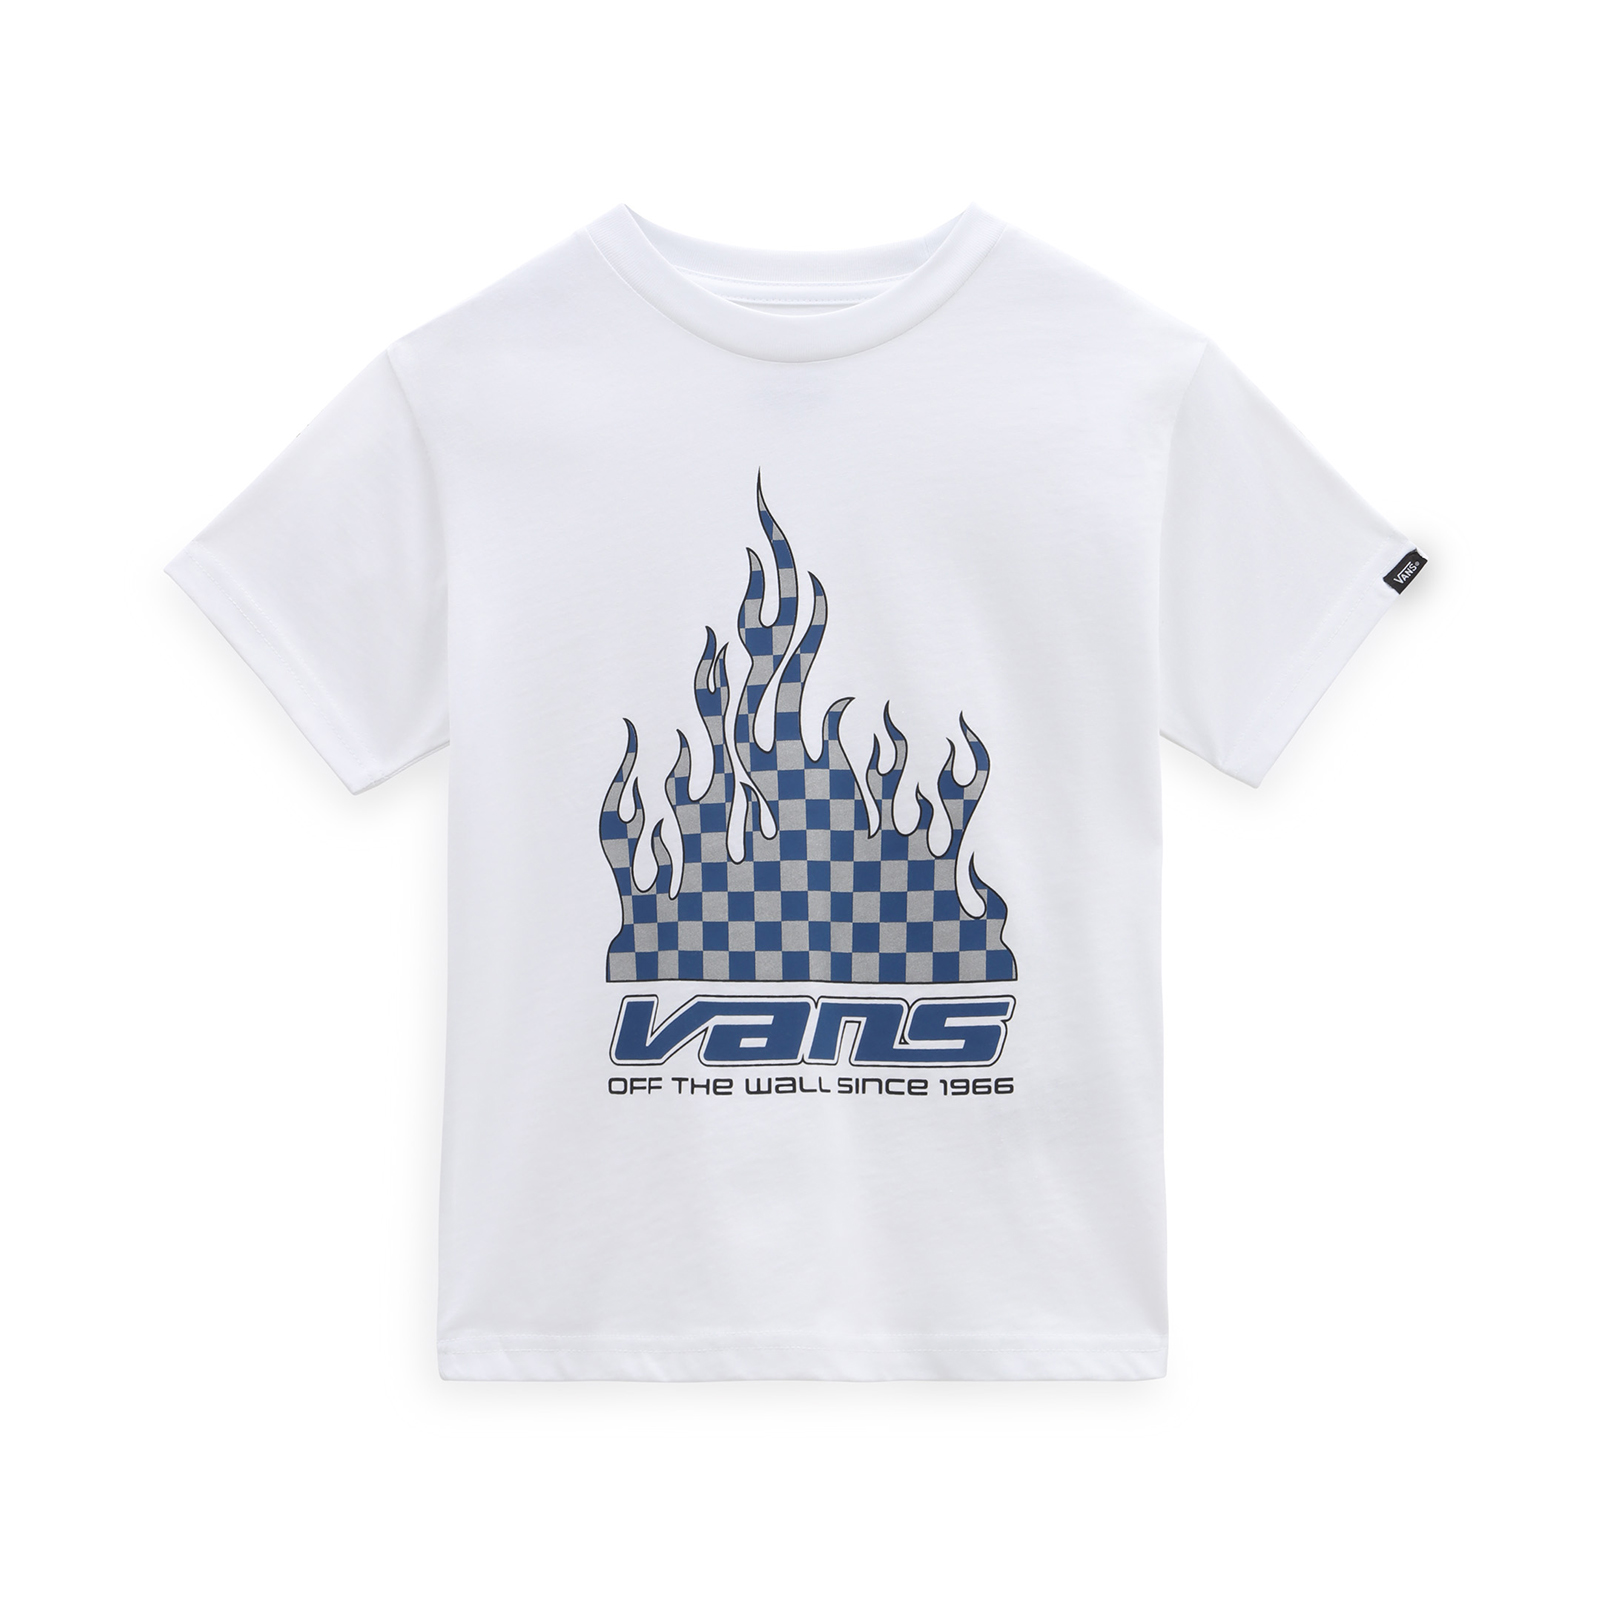 Vans - REFLECTIVE CHECKERBOARD FLAME SS - WHITE